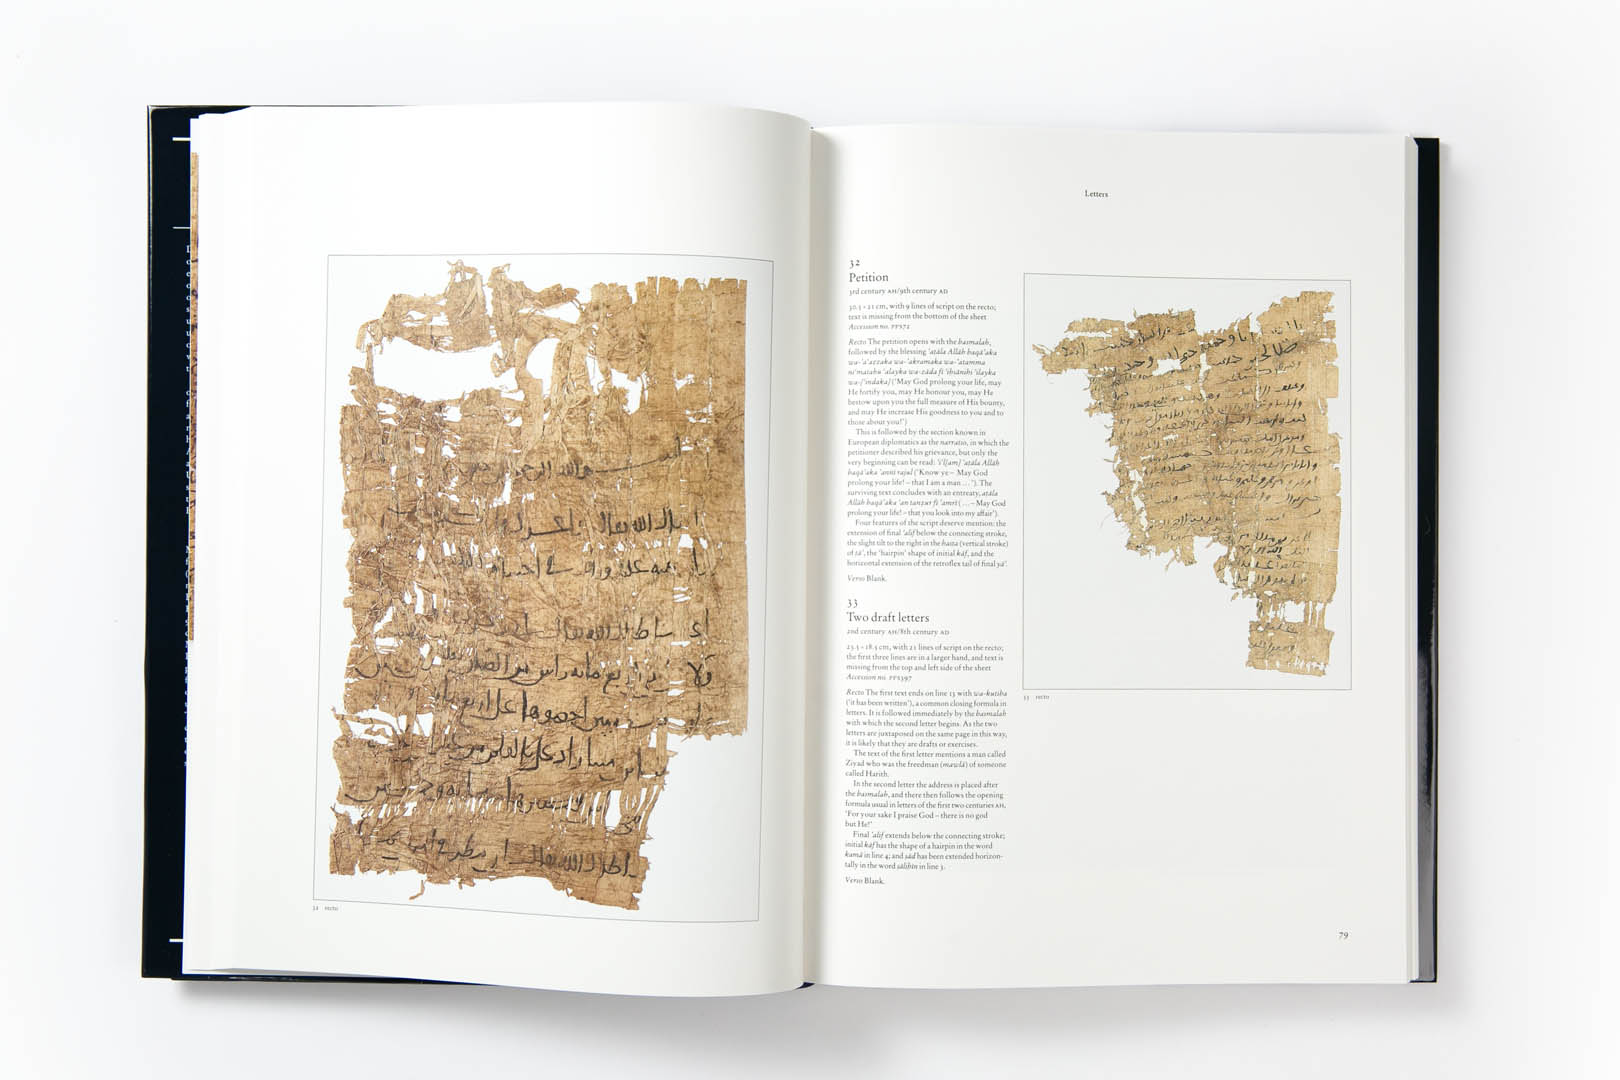 Bills, Letters and Deeds: Arabic Papyri of the 7th to 11th Centuries